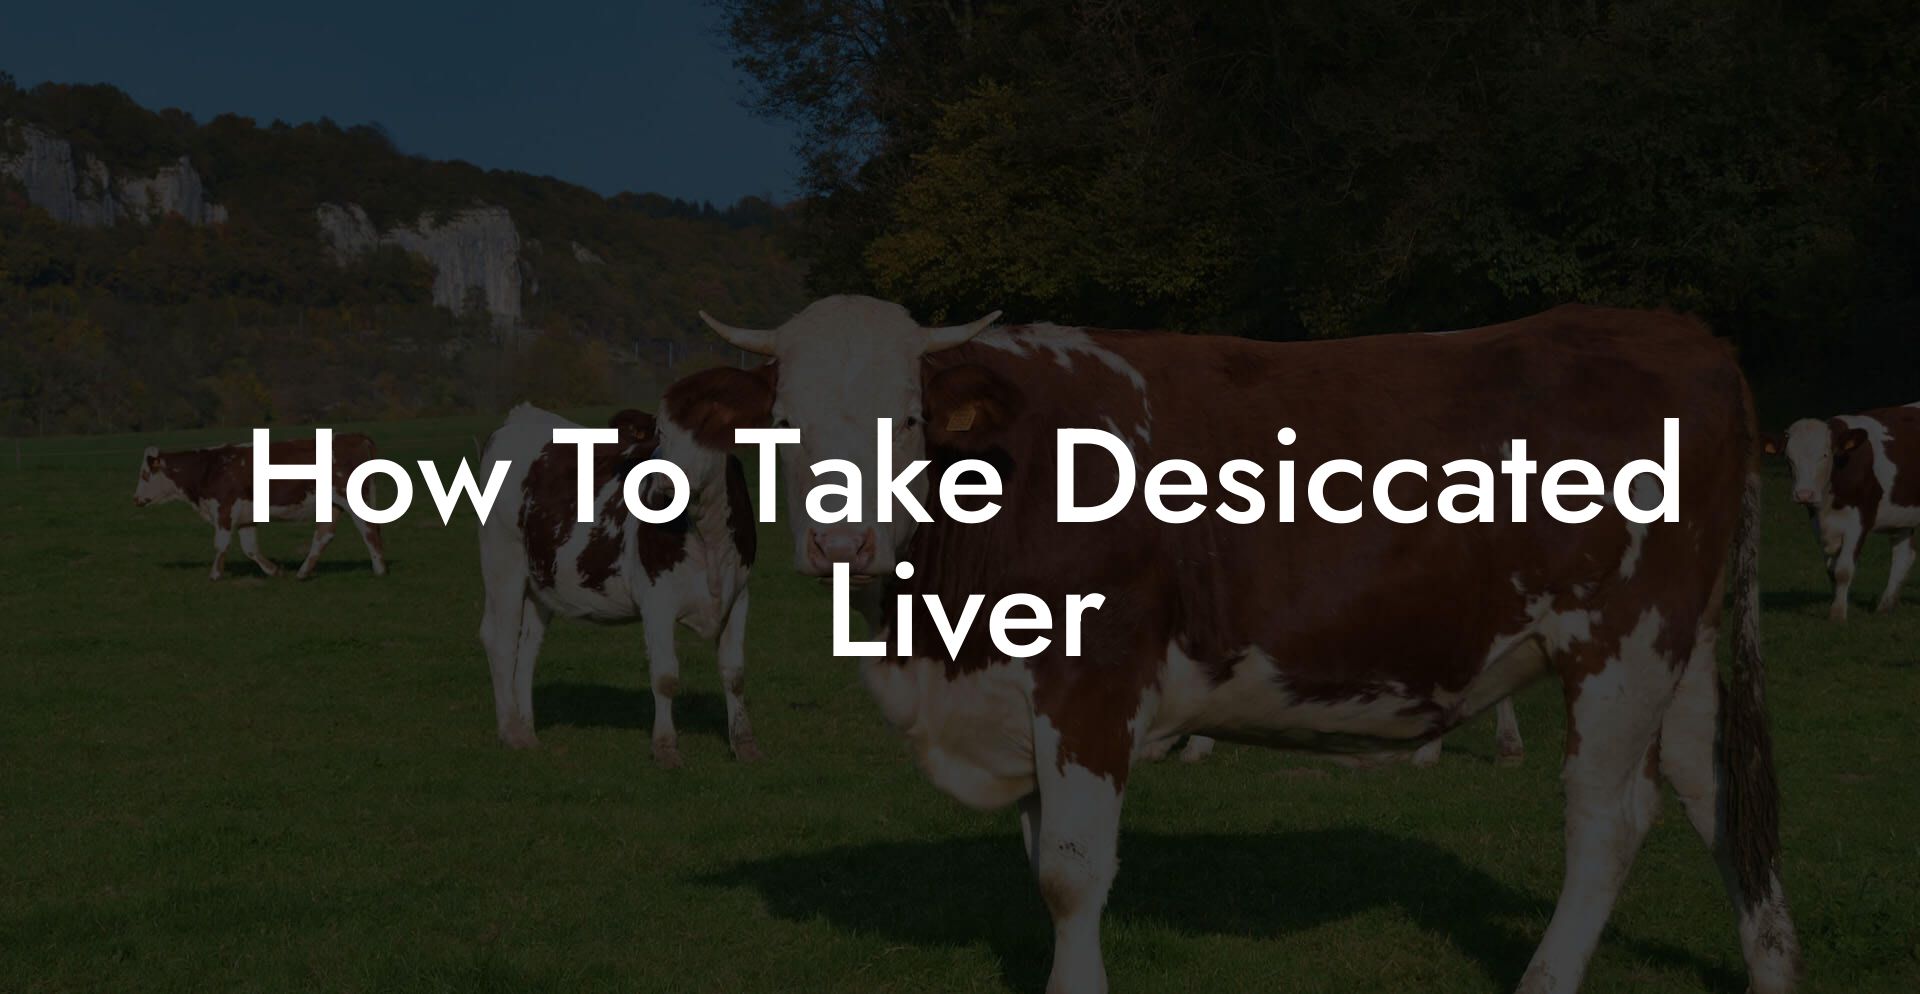 How To Take Desiccated Liver